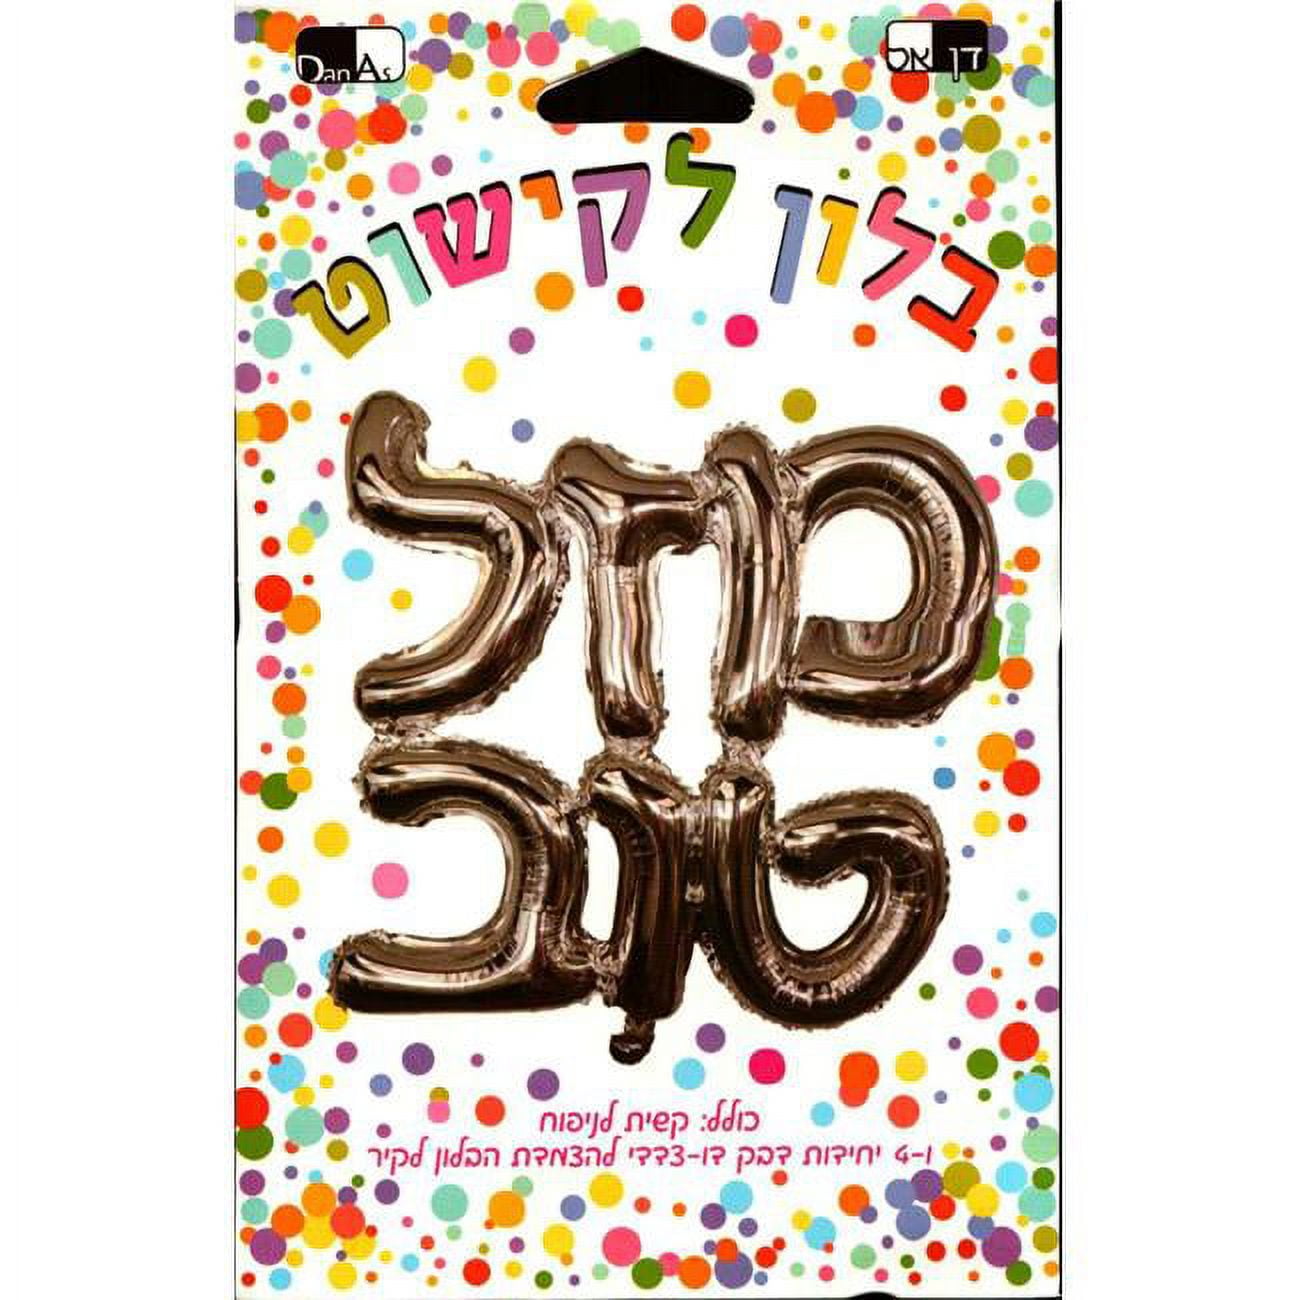 Picture of Dan As 504176 Mazel Tov Balloon with Blowing Straw & Wall Hanging Tape